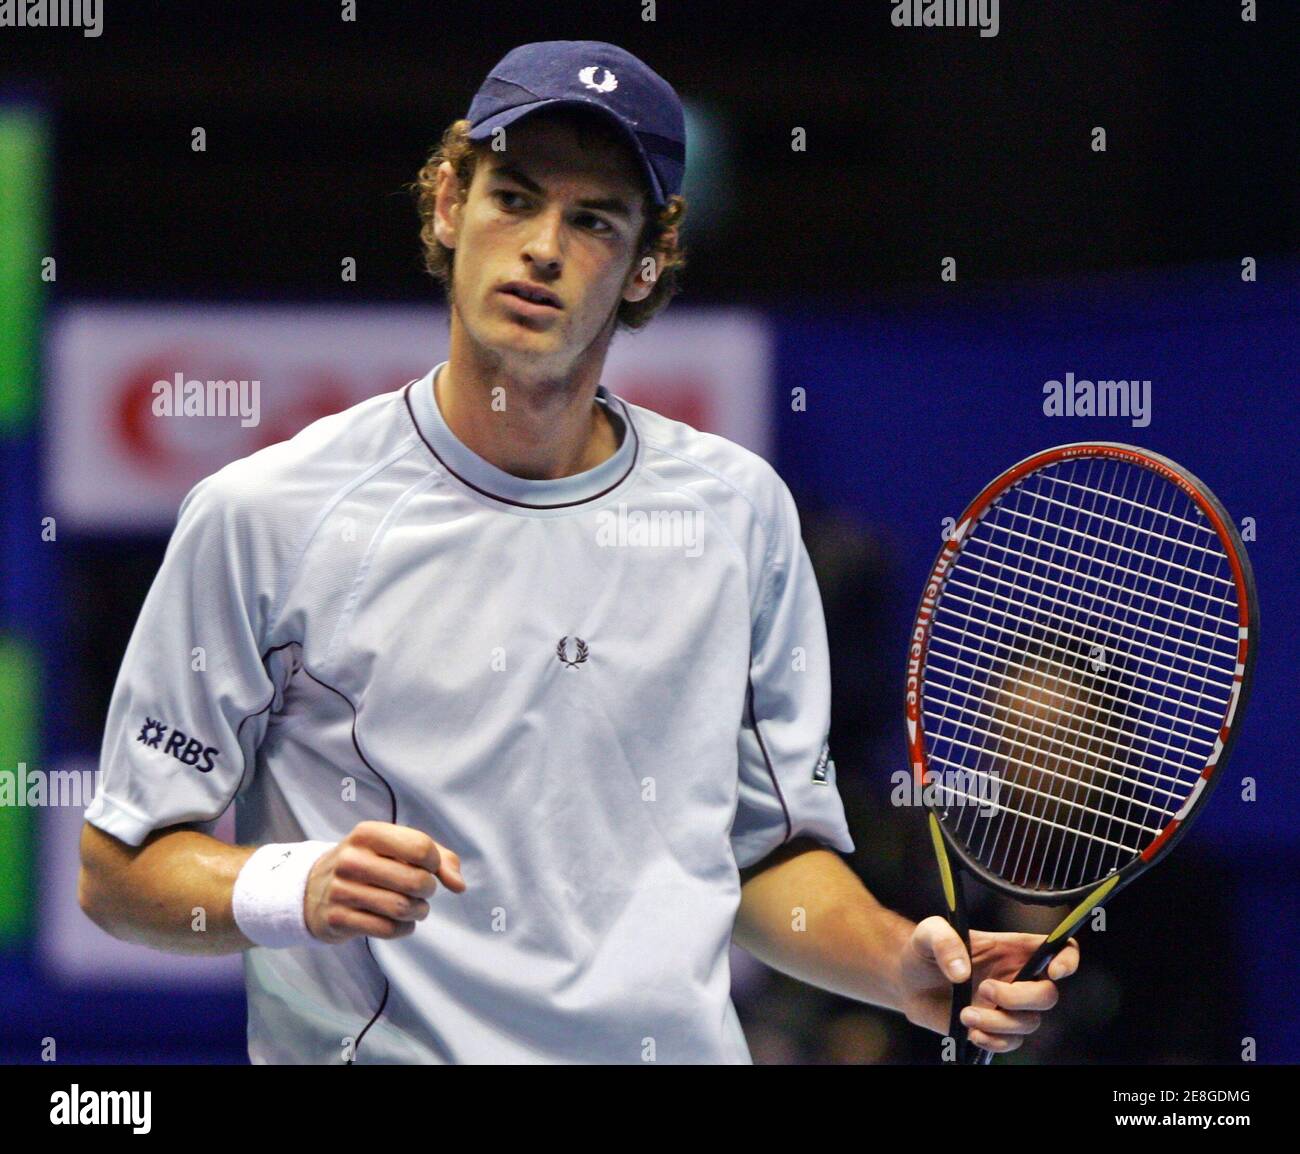 Britain's Andy Murray celebrates his win over Thailand's Paradorn Srichaphan during their semi-finals match at Thailand Open 2005 tennis tournament in Bangkok October 1, 2005. Murray won the match 7-6 5-7 6-2. REUTERS/Chaiwat Subprasom Stock Photo